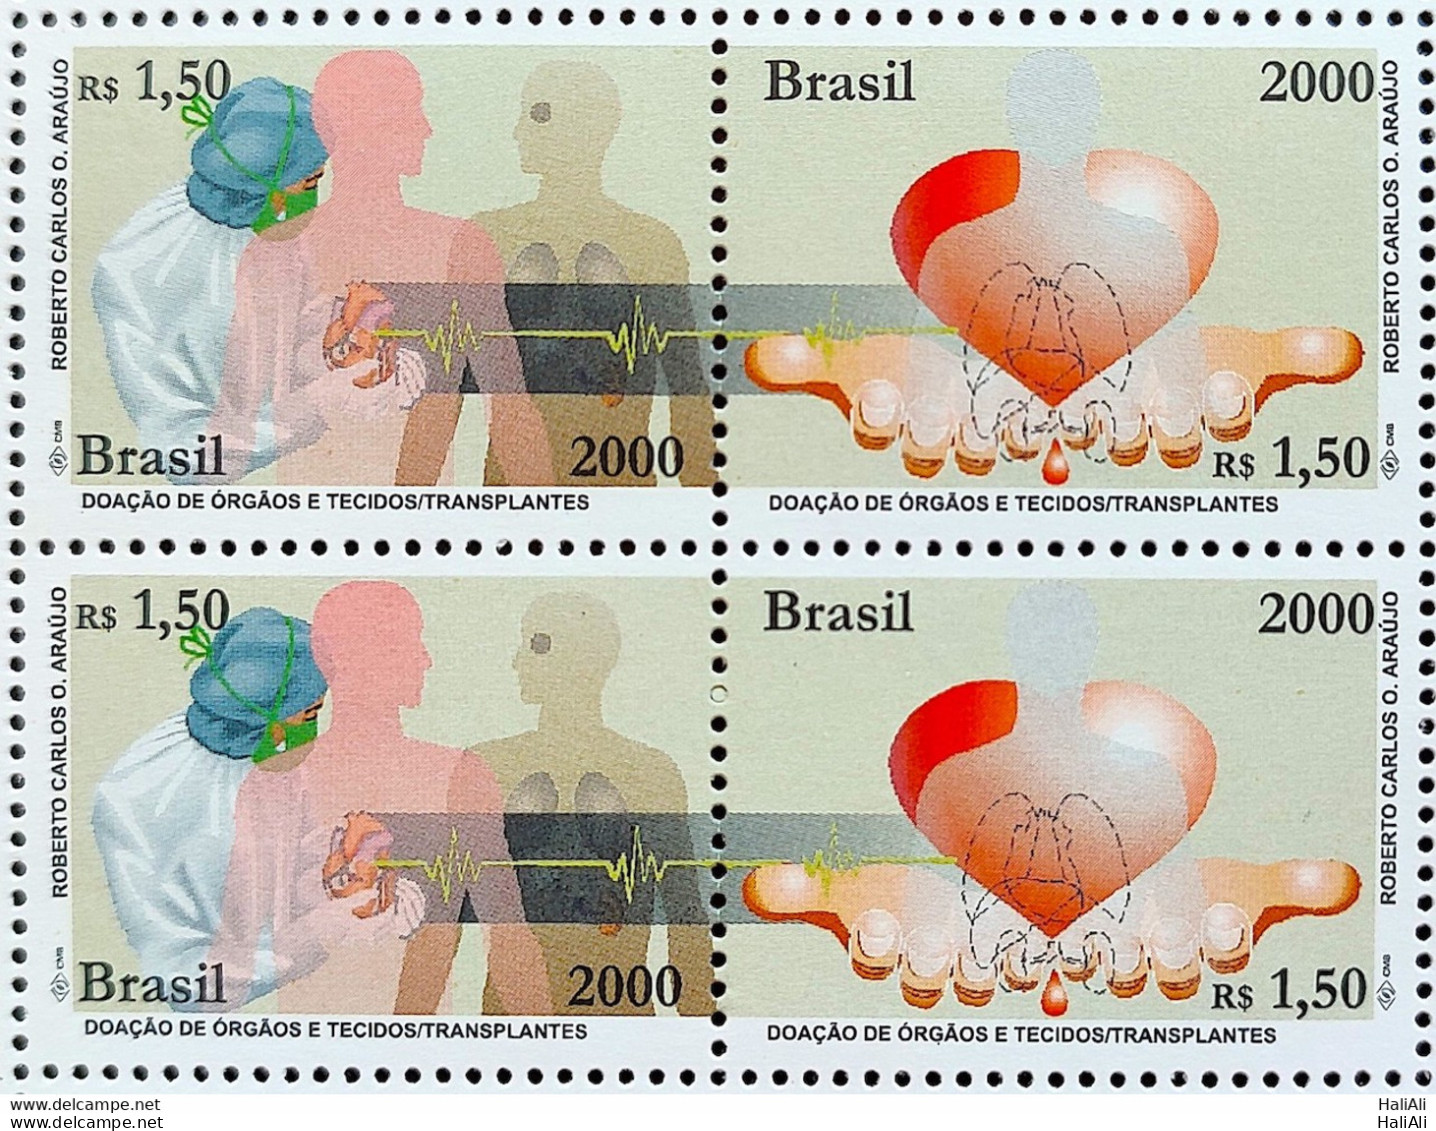 C 2341 Brazil Stamp Donation Of Organ And Tissues Science Health 2000 Block Of 4 - Unused Stamps